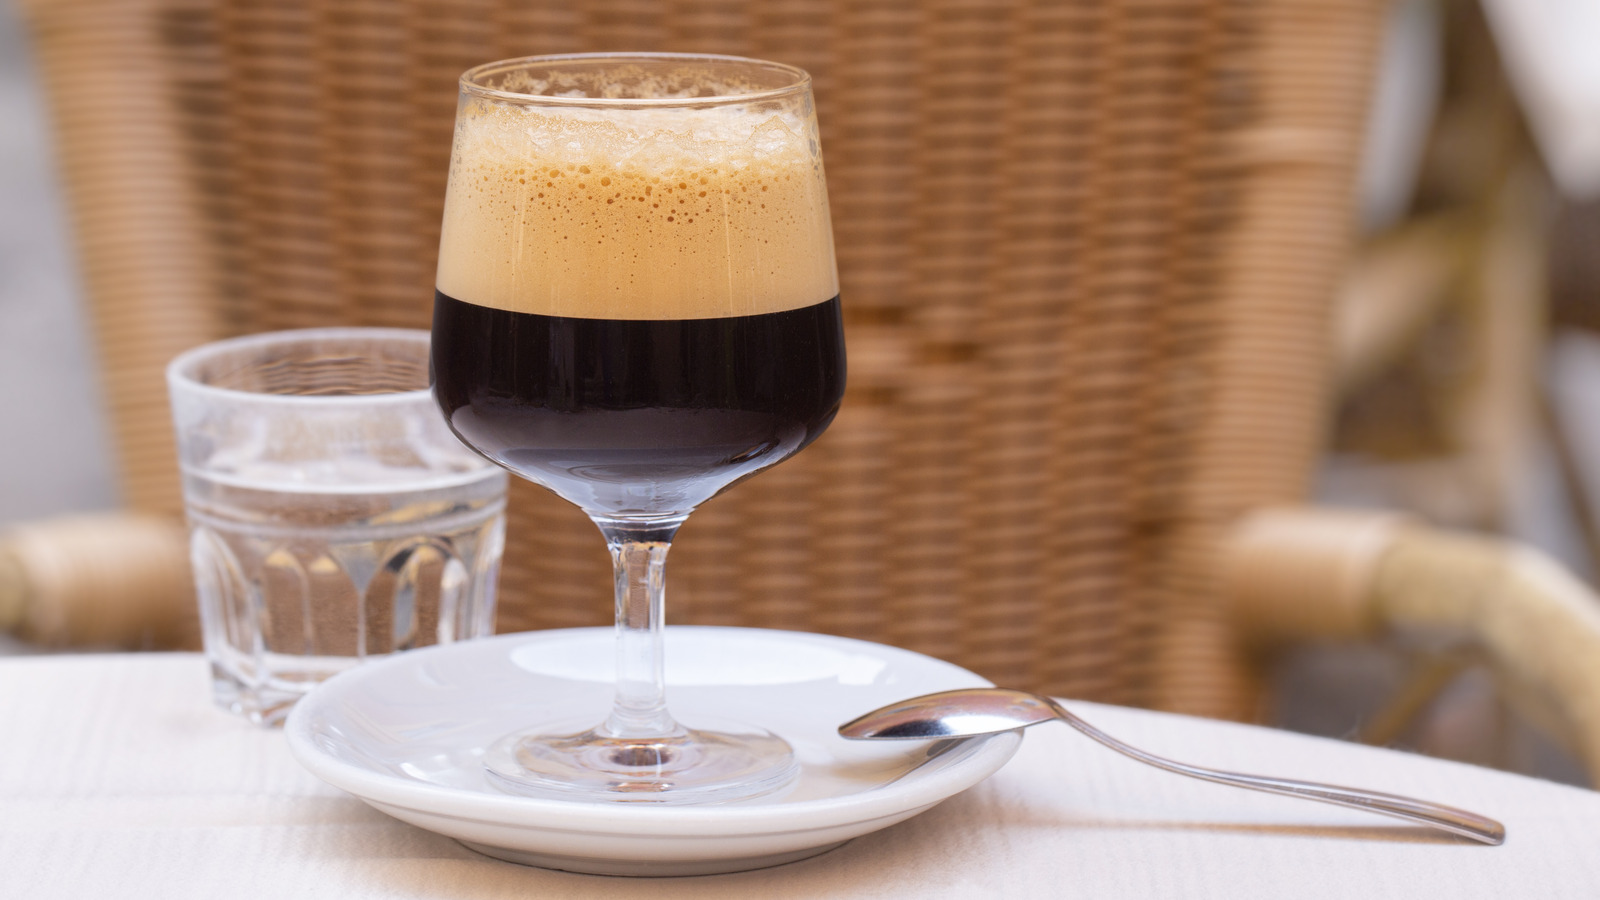 Shakerato: The Italian Iced Coffee Style You Can’t Miss